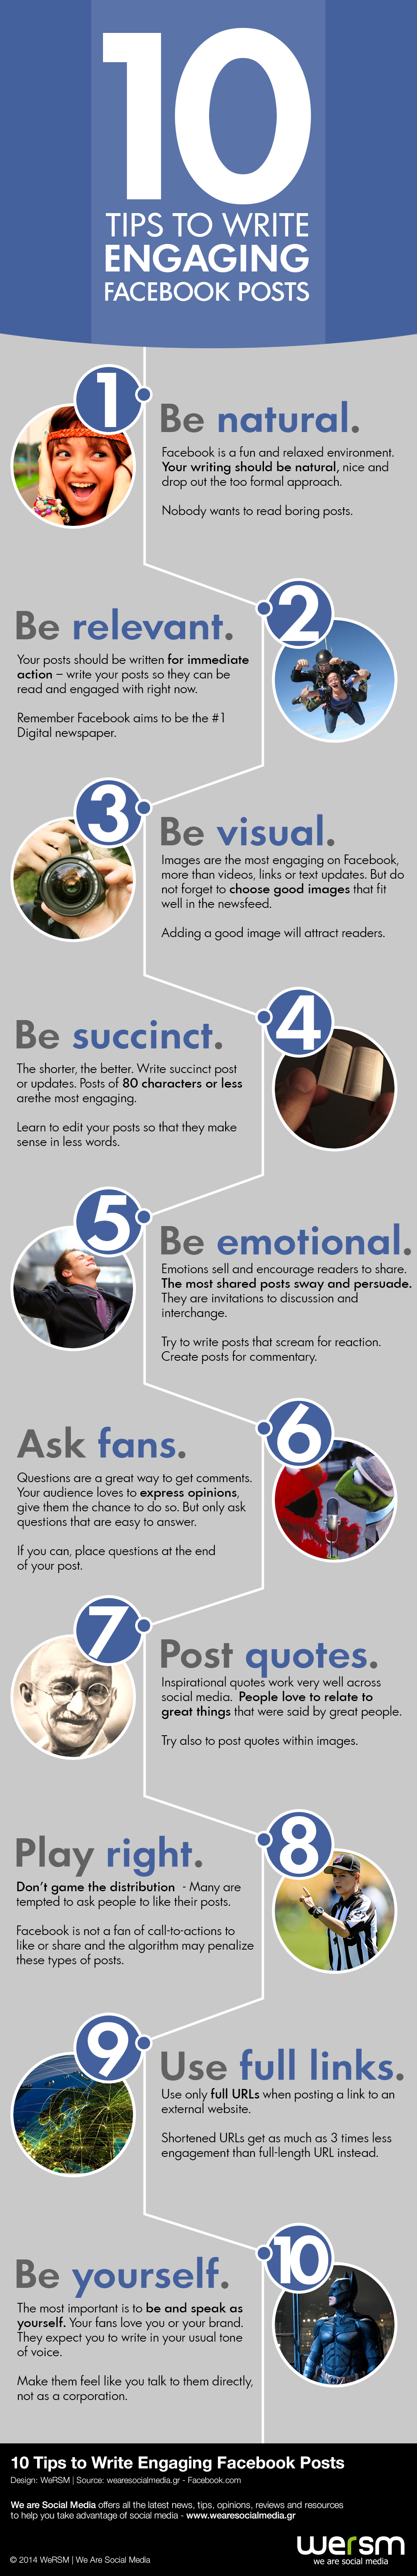 wersm_infographic_tips_engaging_facebook